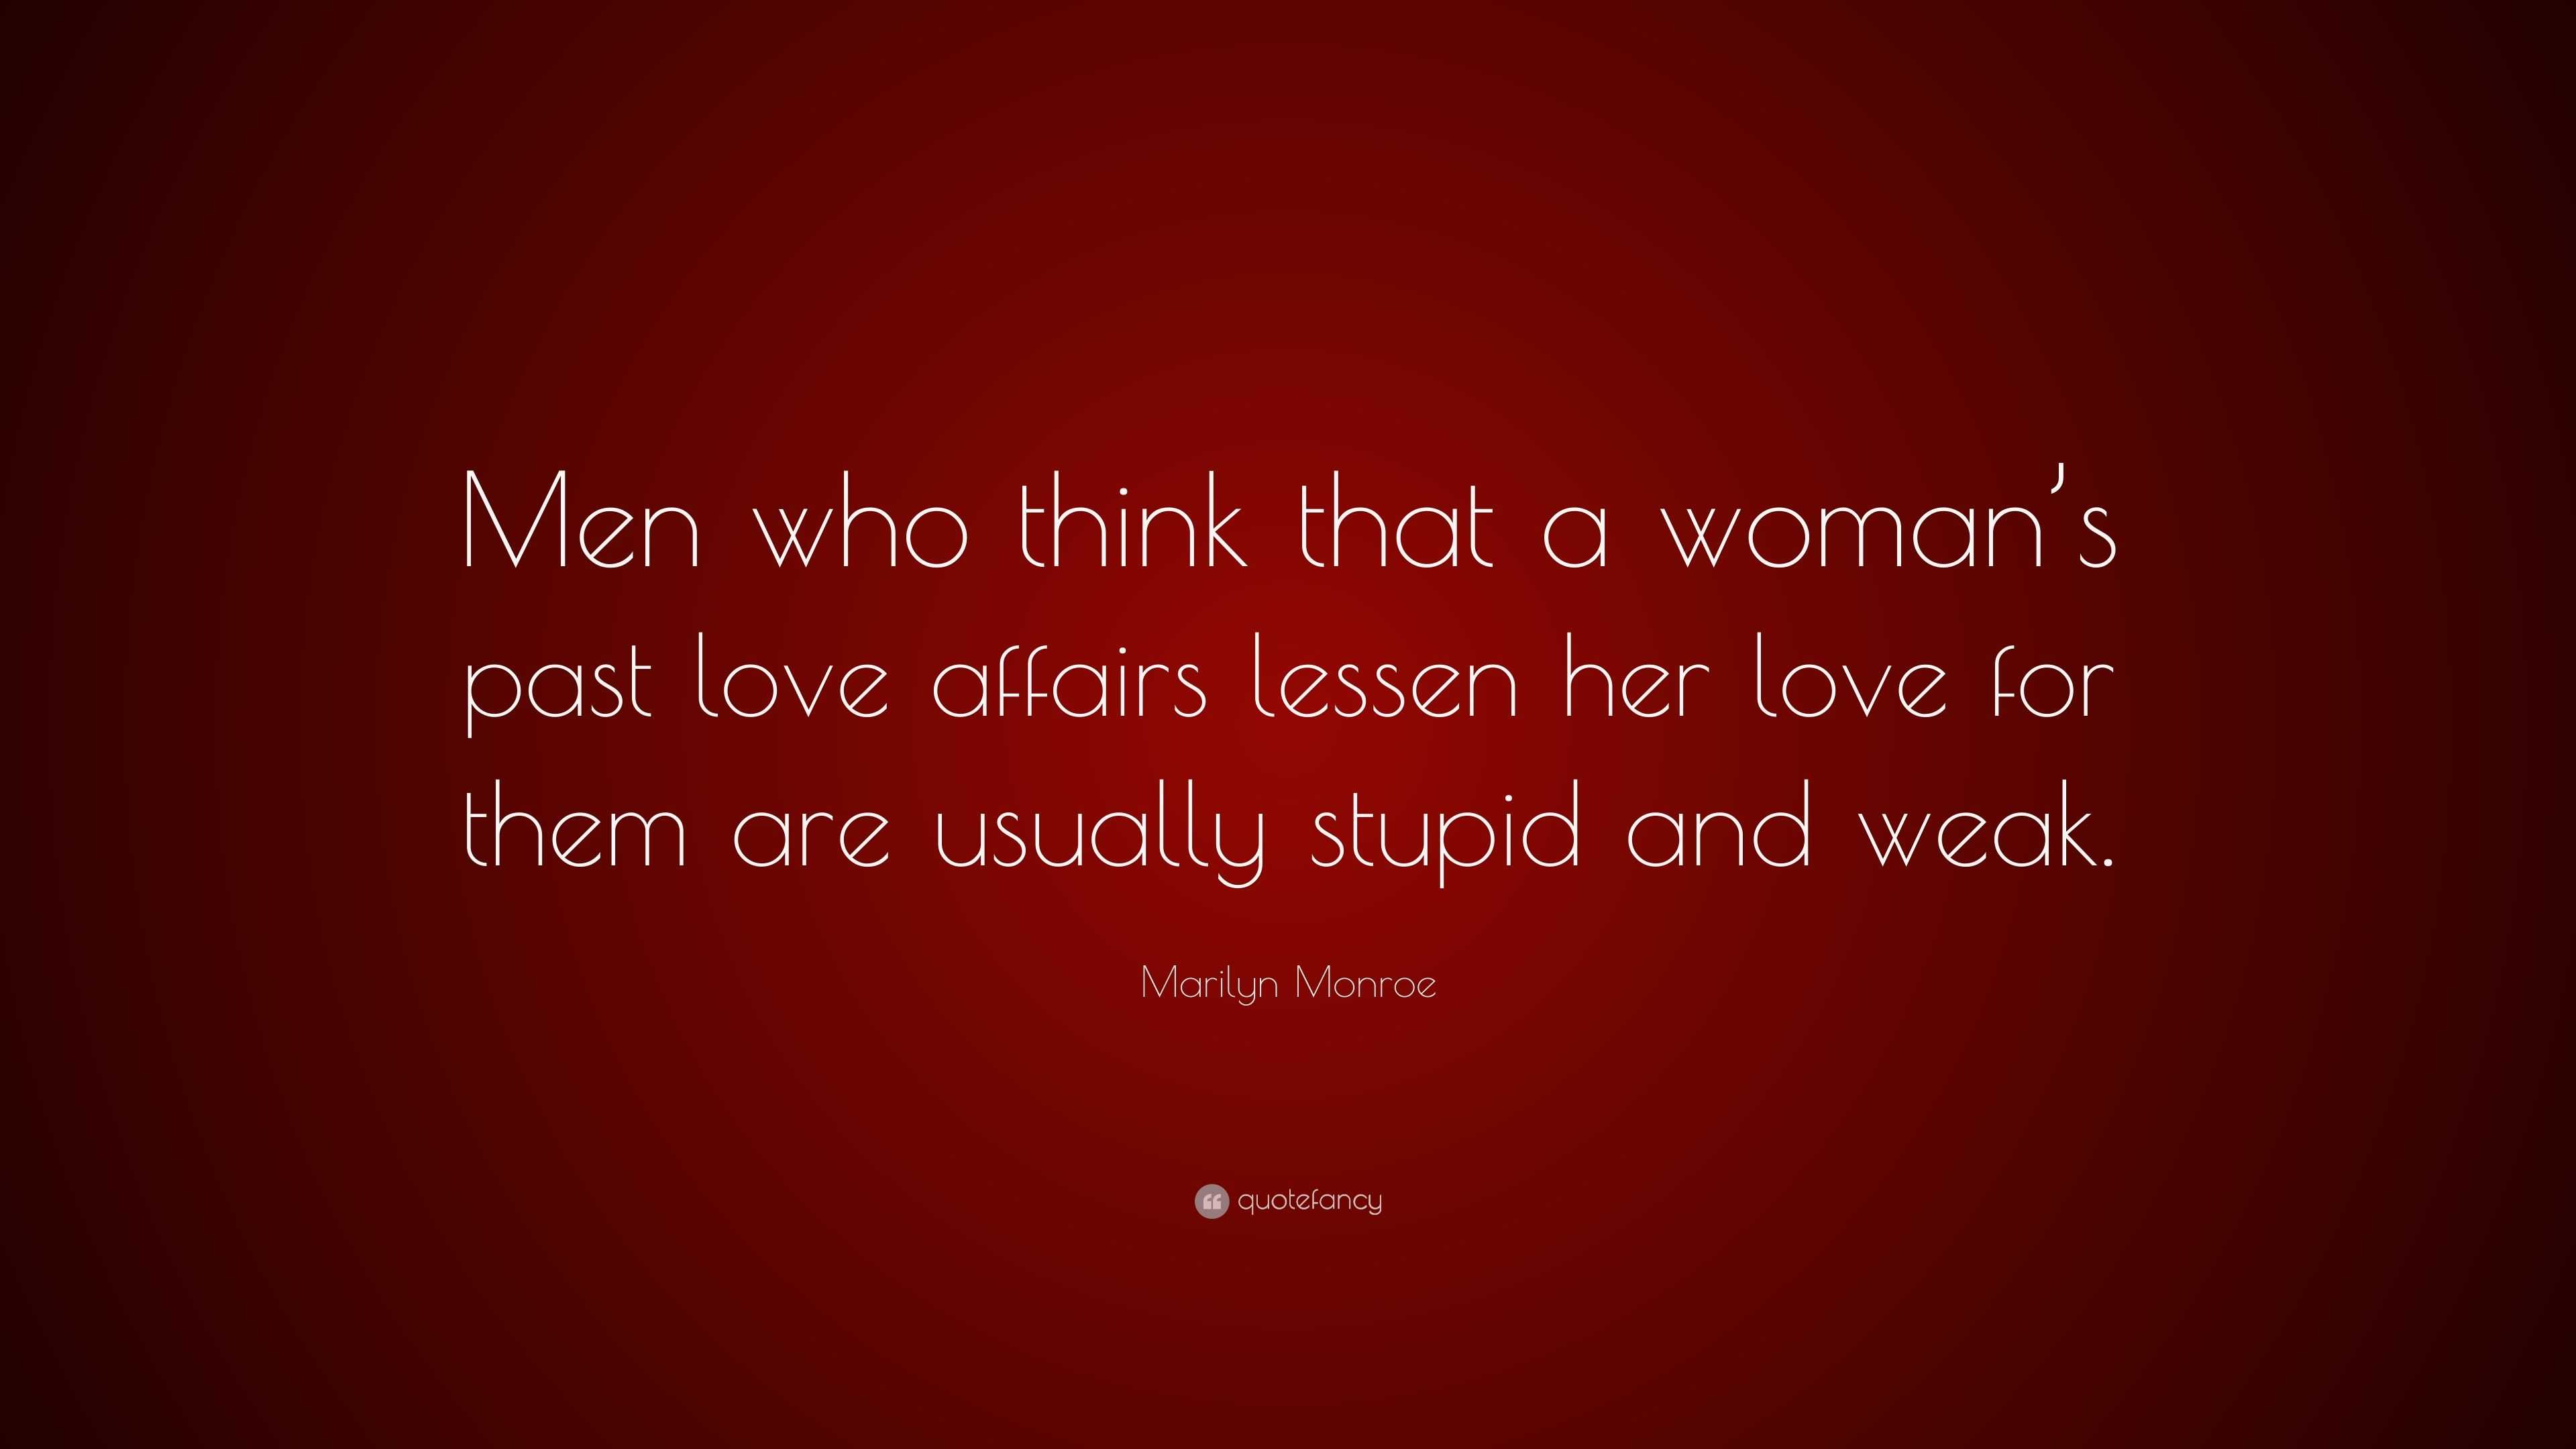 Marilyn Monroe Quote: “Men who think that a woman’s past love affairs ...